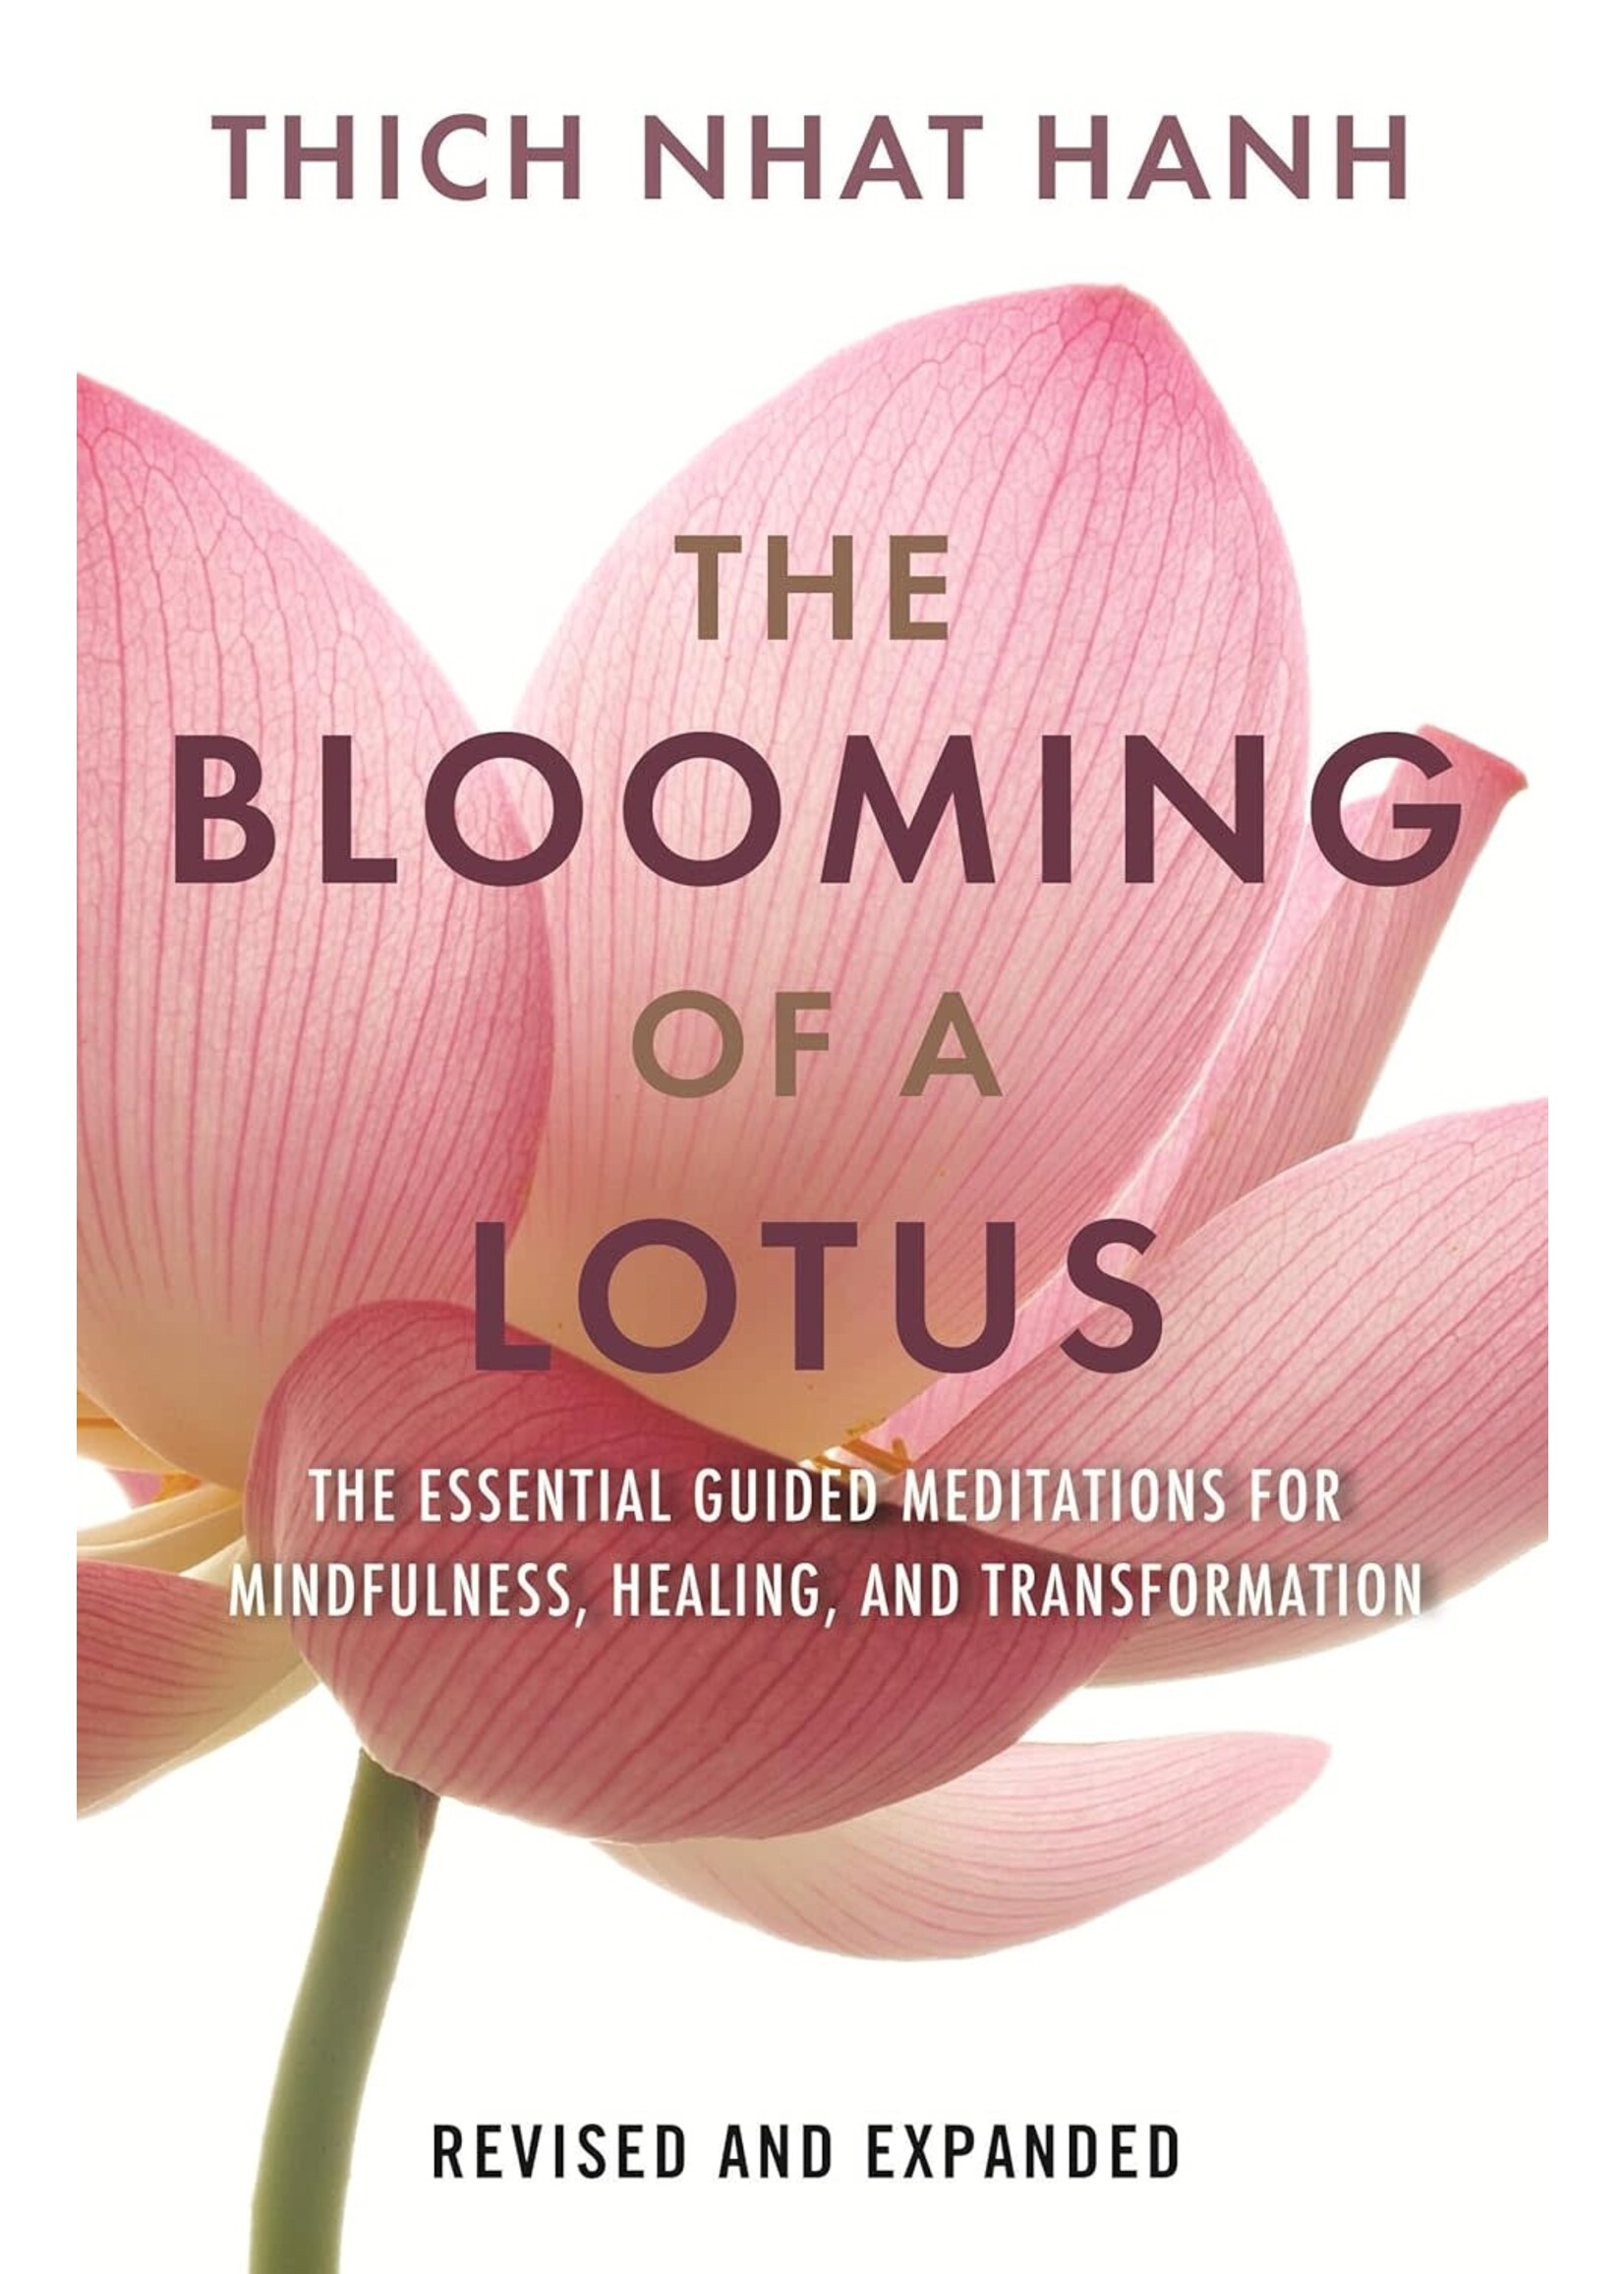 The Blooming of A Lotus - Essential Guided Meditations for Mindfulness, Healing, and Transformation